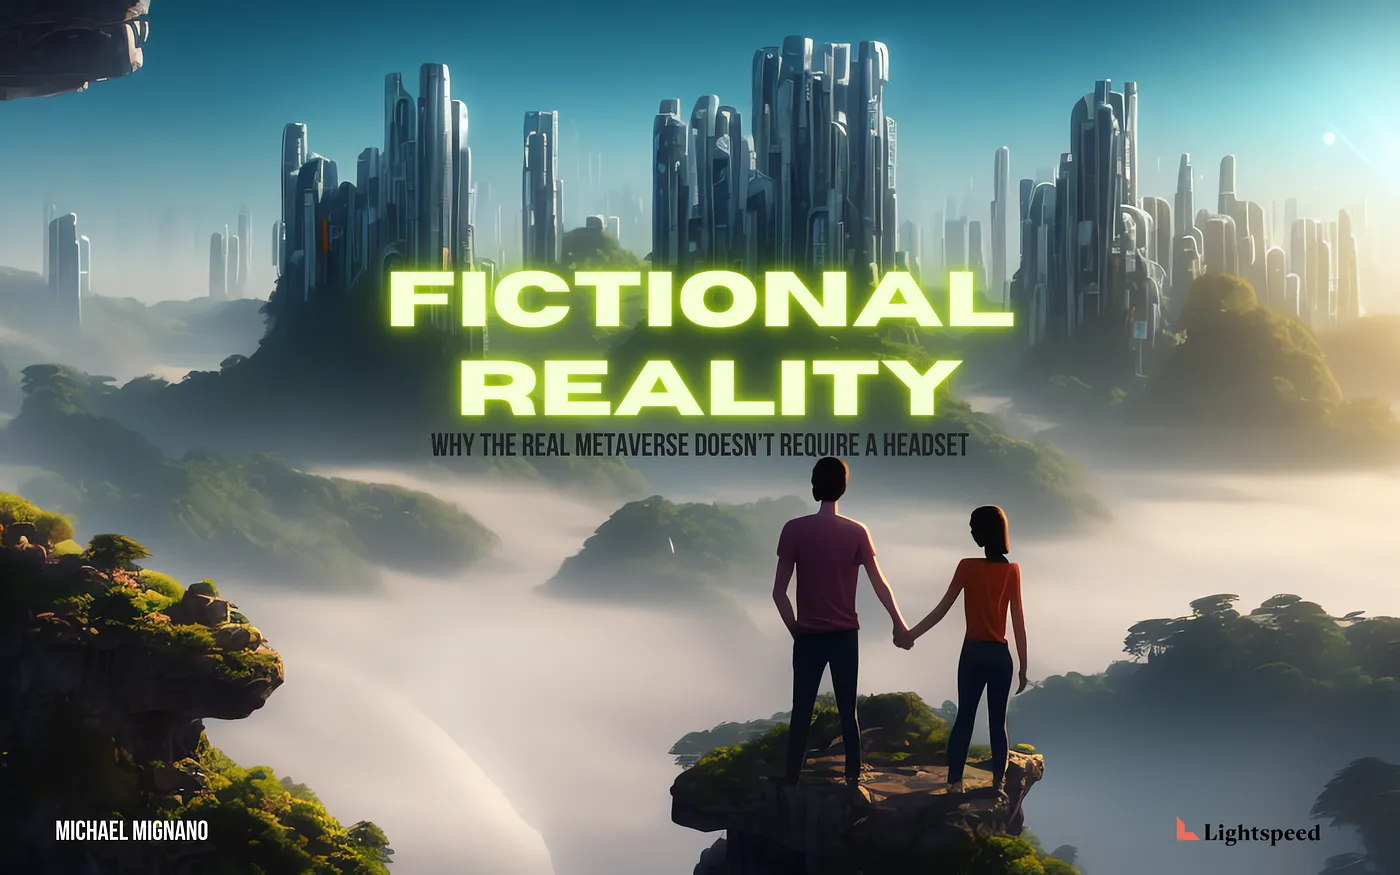 Fictional Reality—Why the Real Metaverse Doesn’t Require a Headset